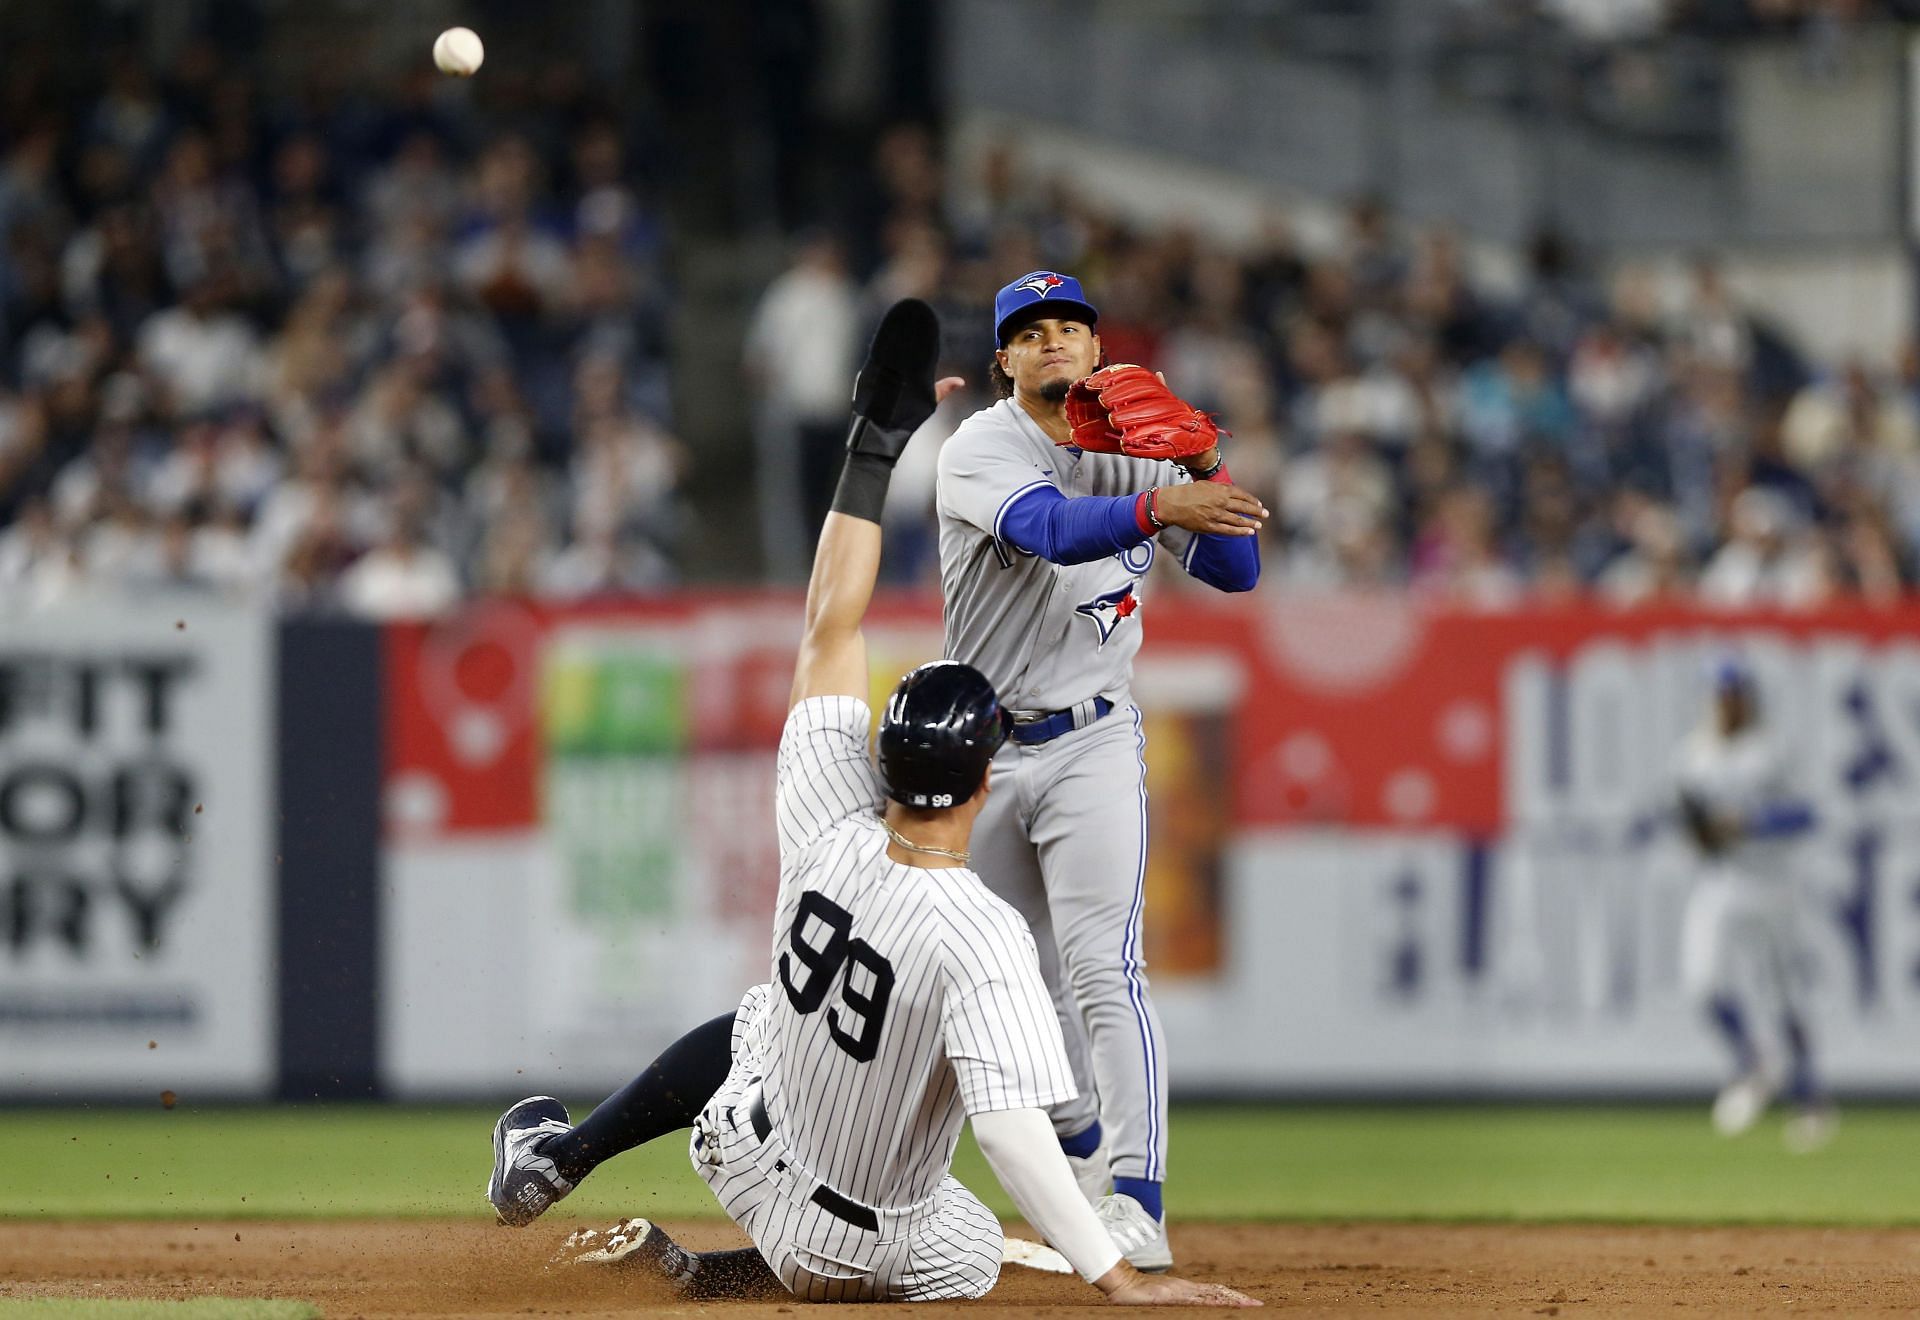 The Toronto Blue Jays and New York Yankees square off Monday in the MLB.